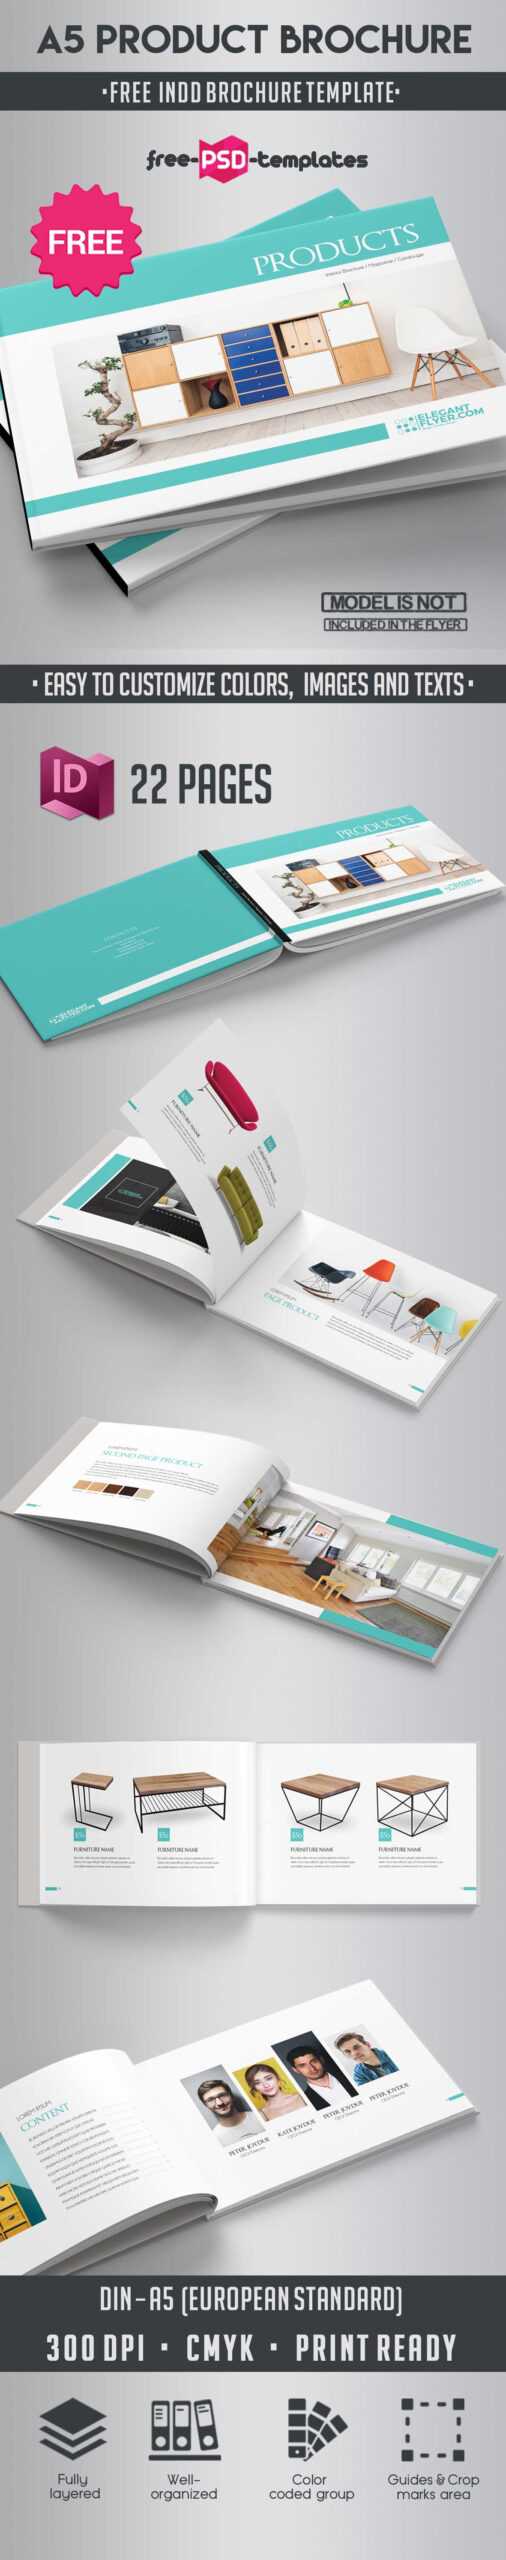 Free A5 Product Catalog Brochure Indd Template | Free Psd Inside Product Brochure Template Free